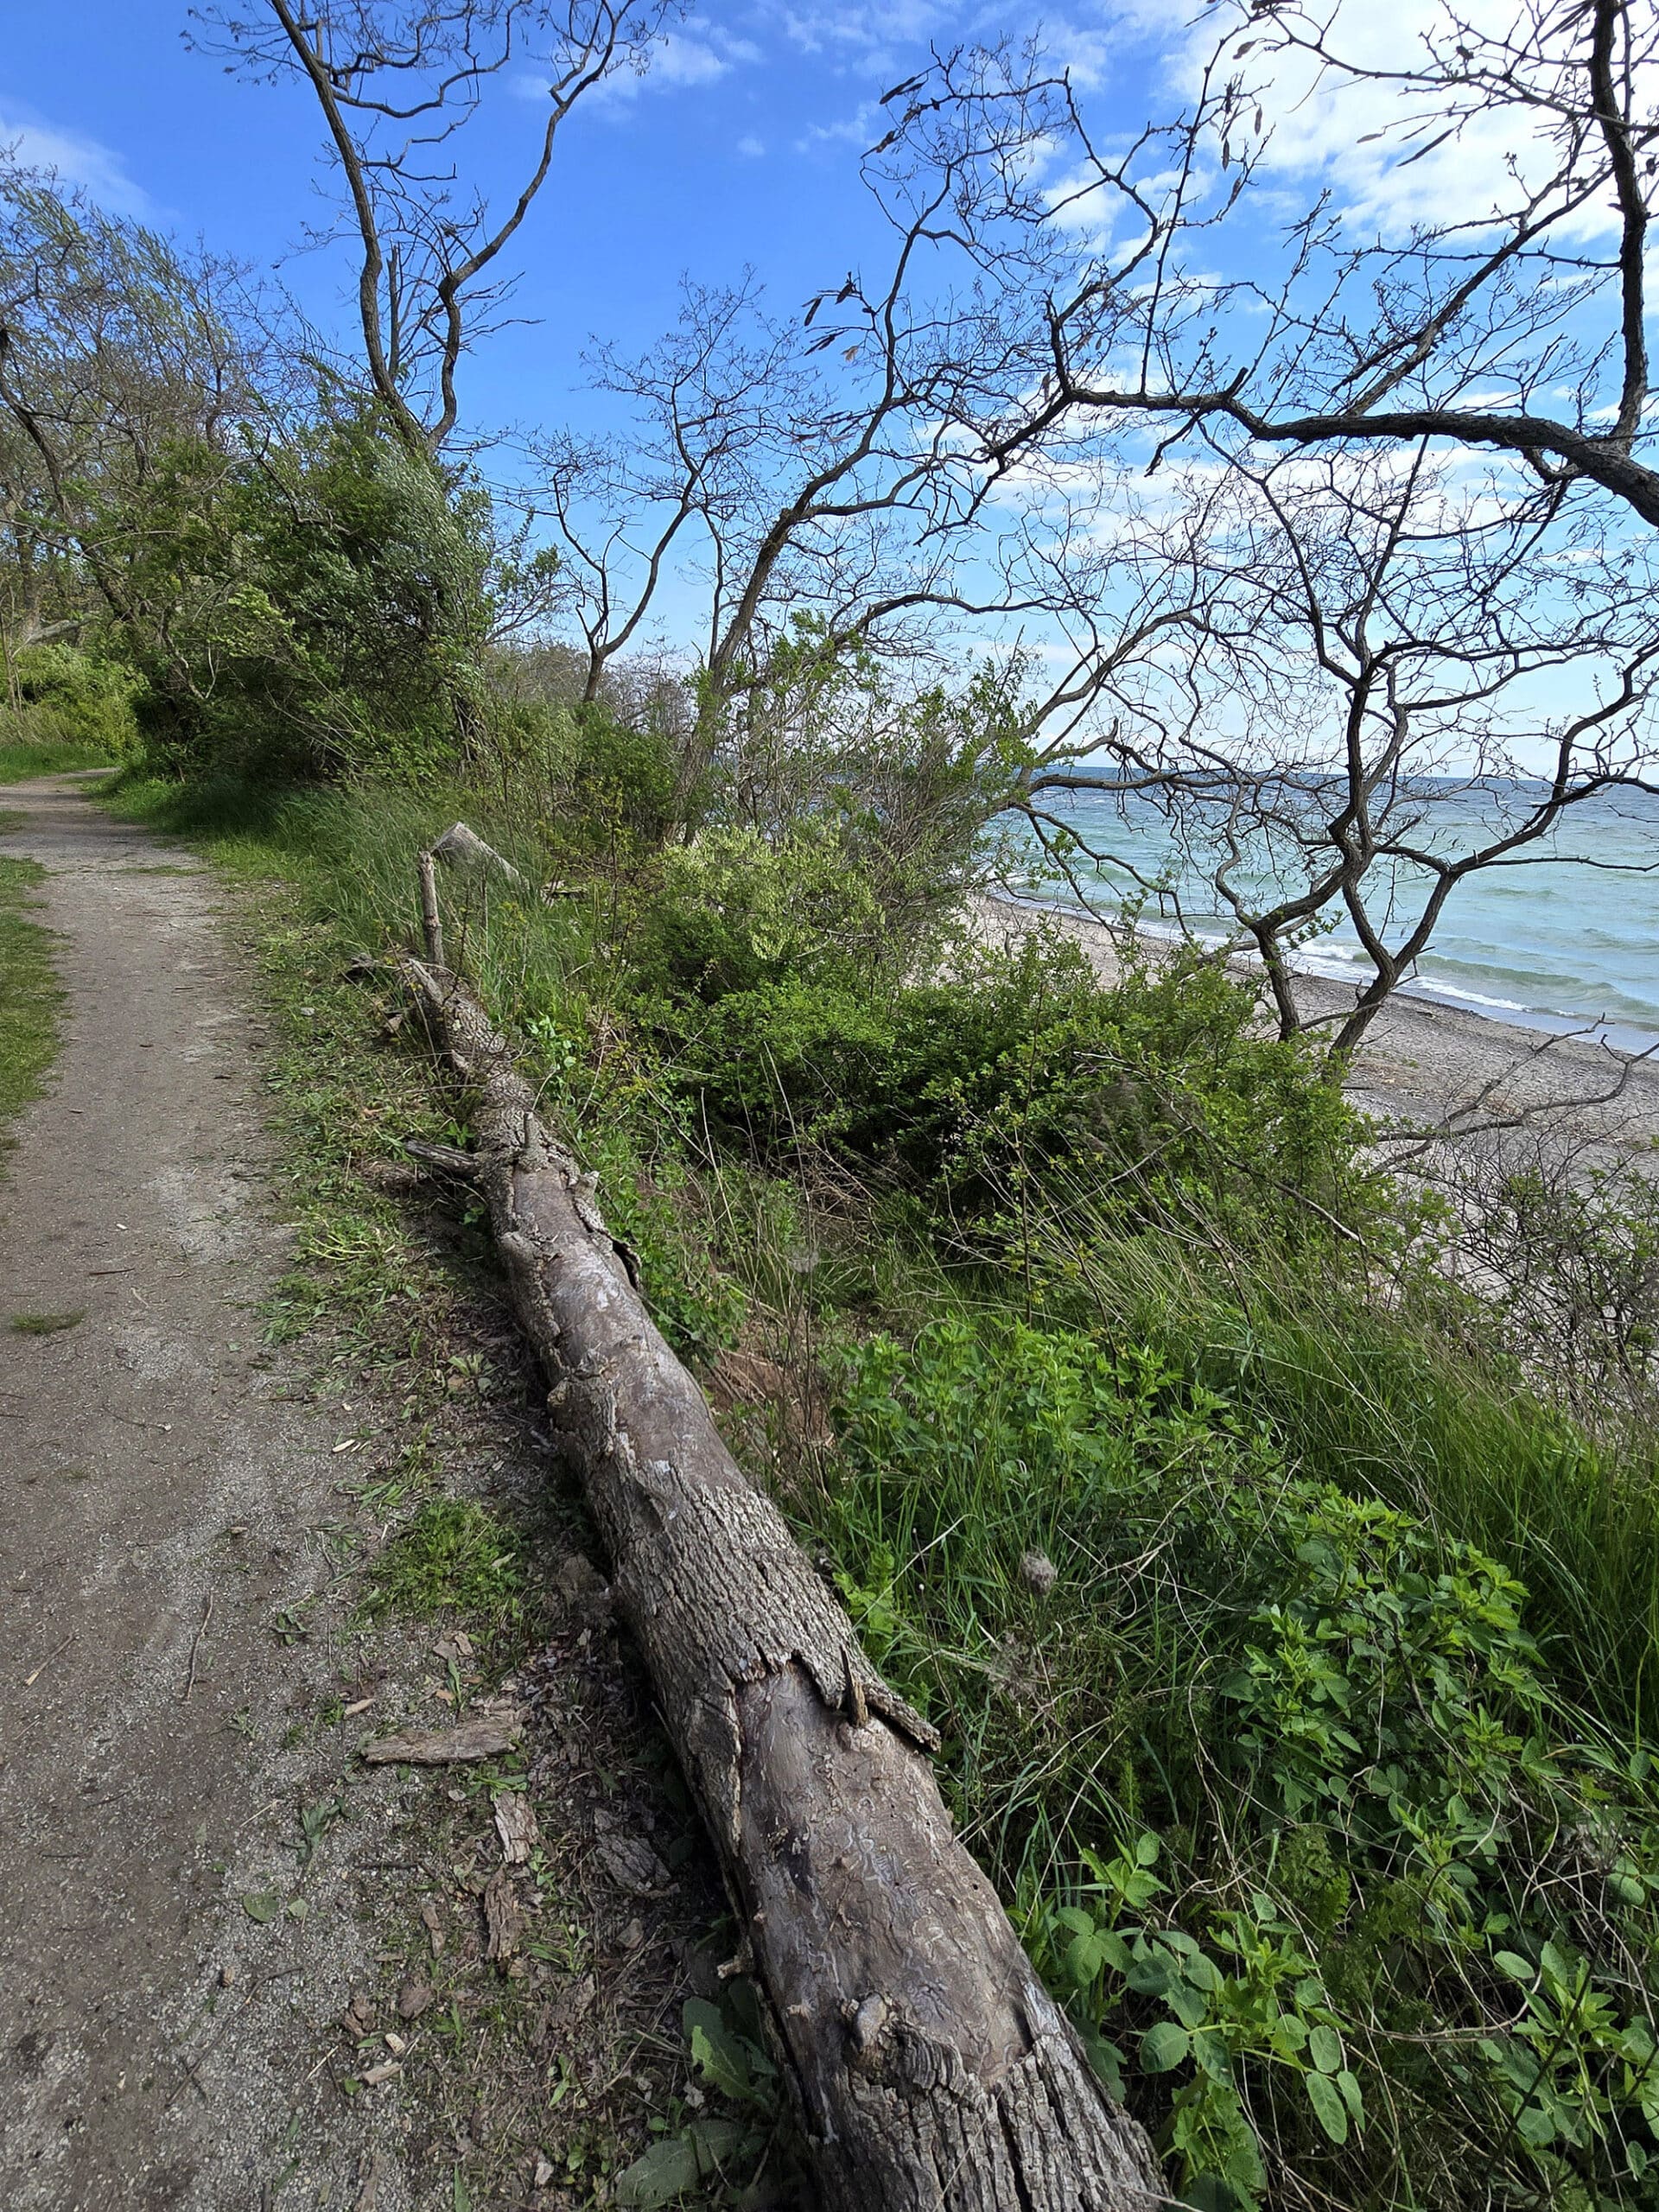 A flat but narrow trail along a cliff, overlooking the beach at rock point provincial park.